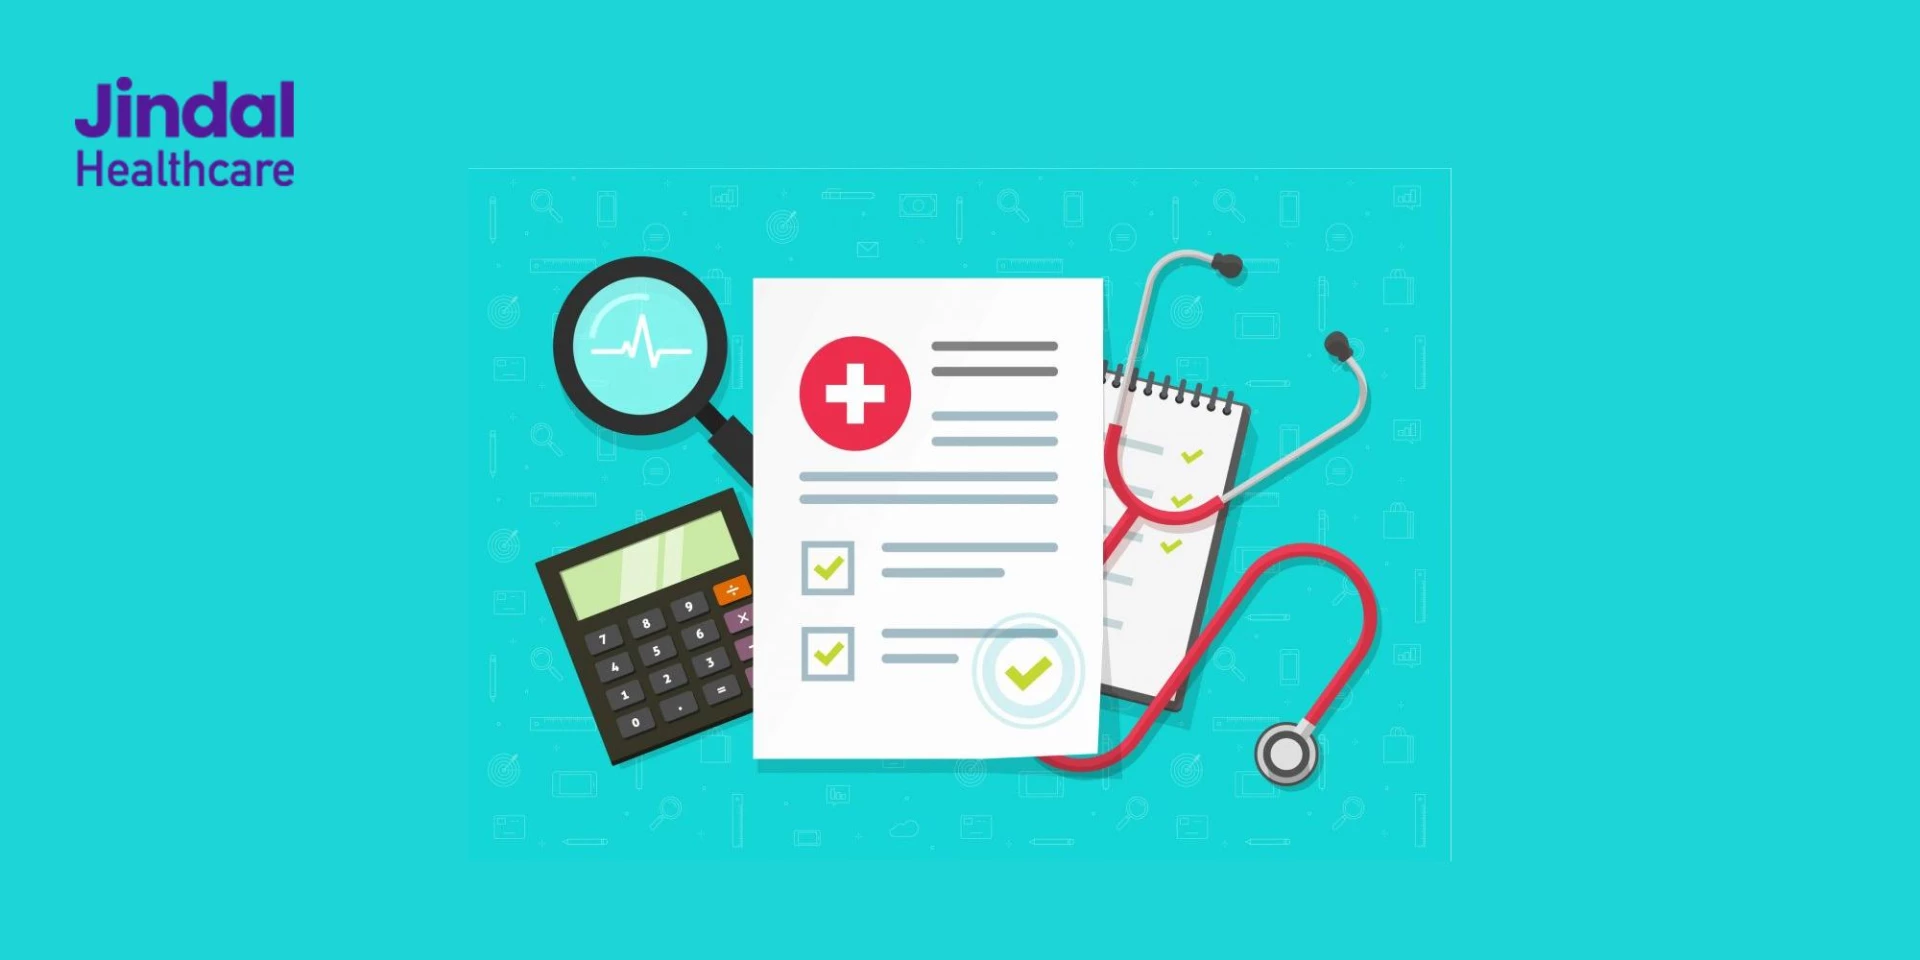 Is Prior Authorization Process a Burden on Your Practice?